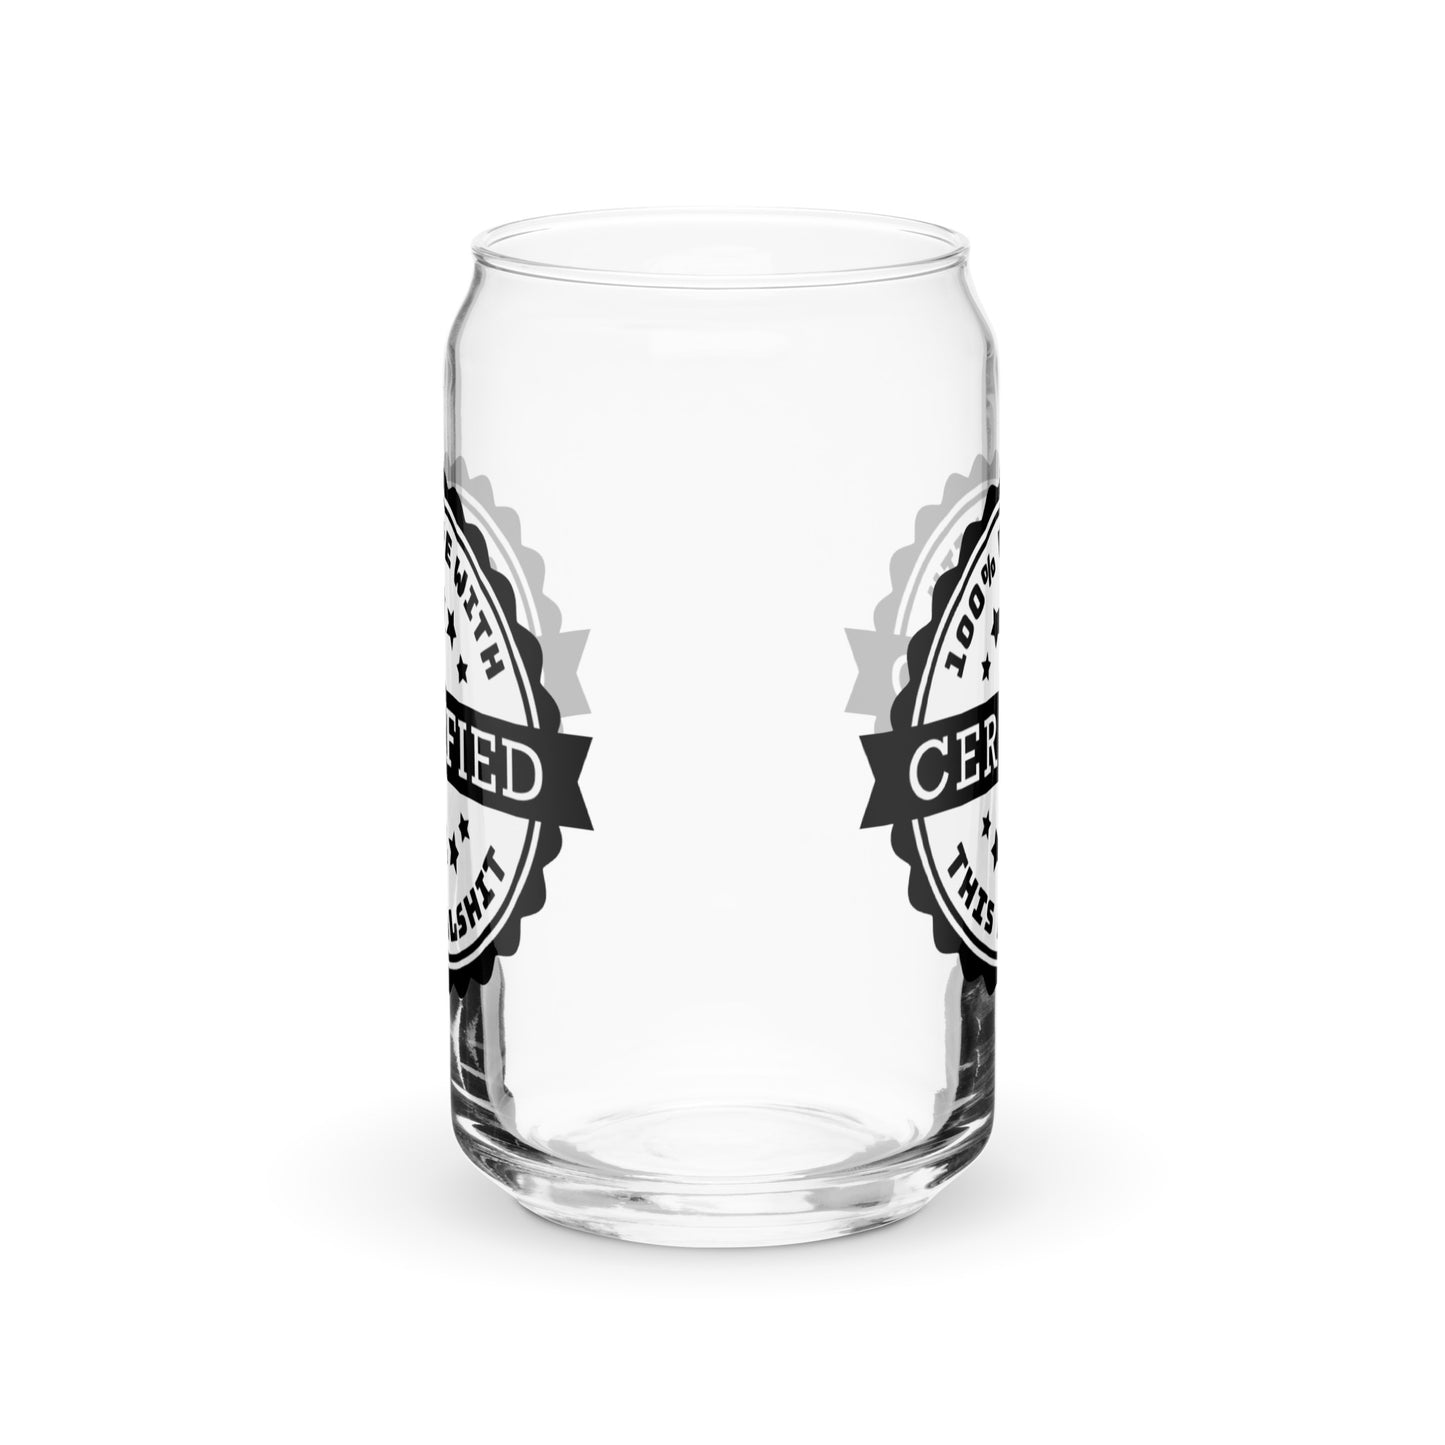 A can-shaped glass turn to the side to show that the image printed on it is printed on two sides. Both images are partially visible.